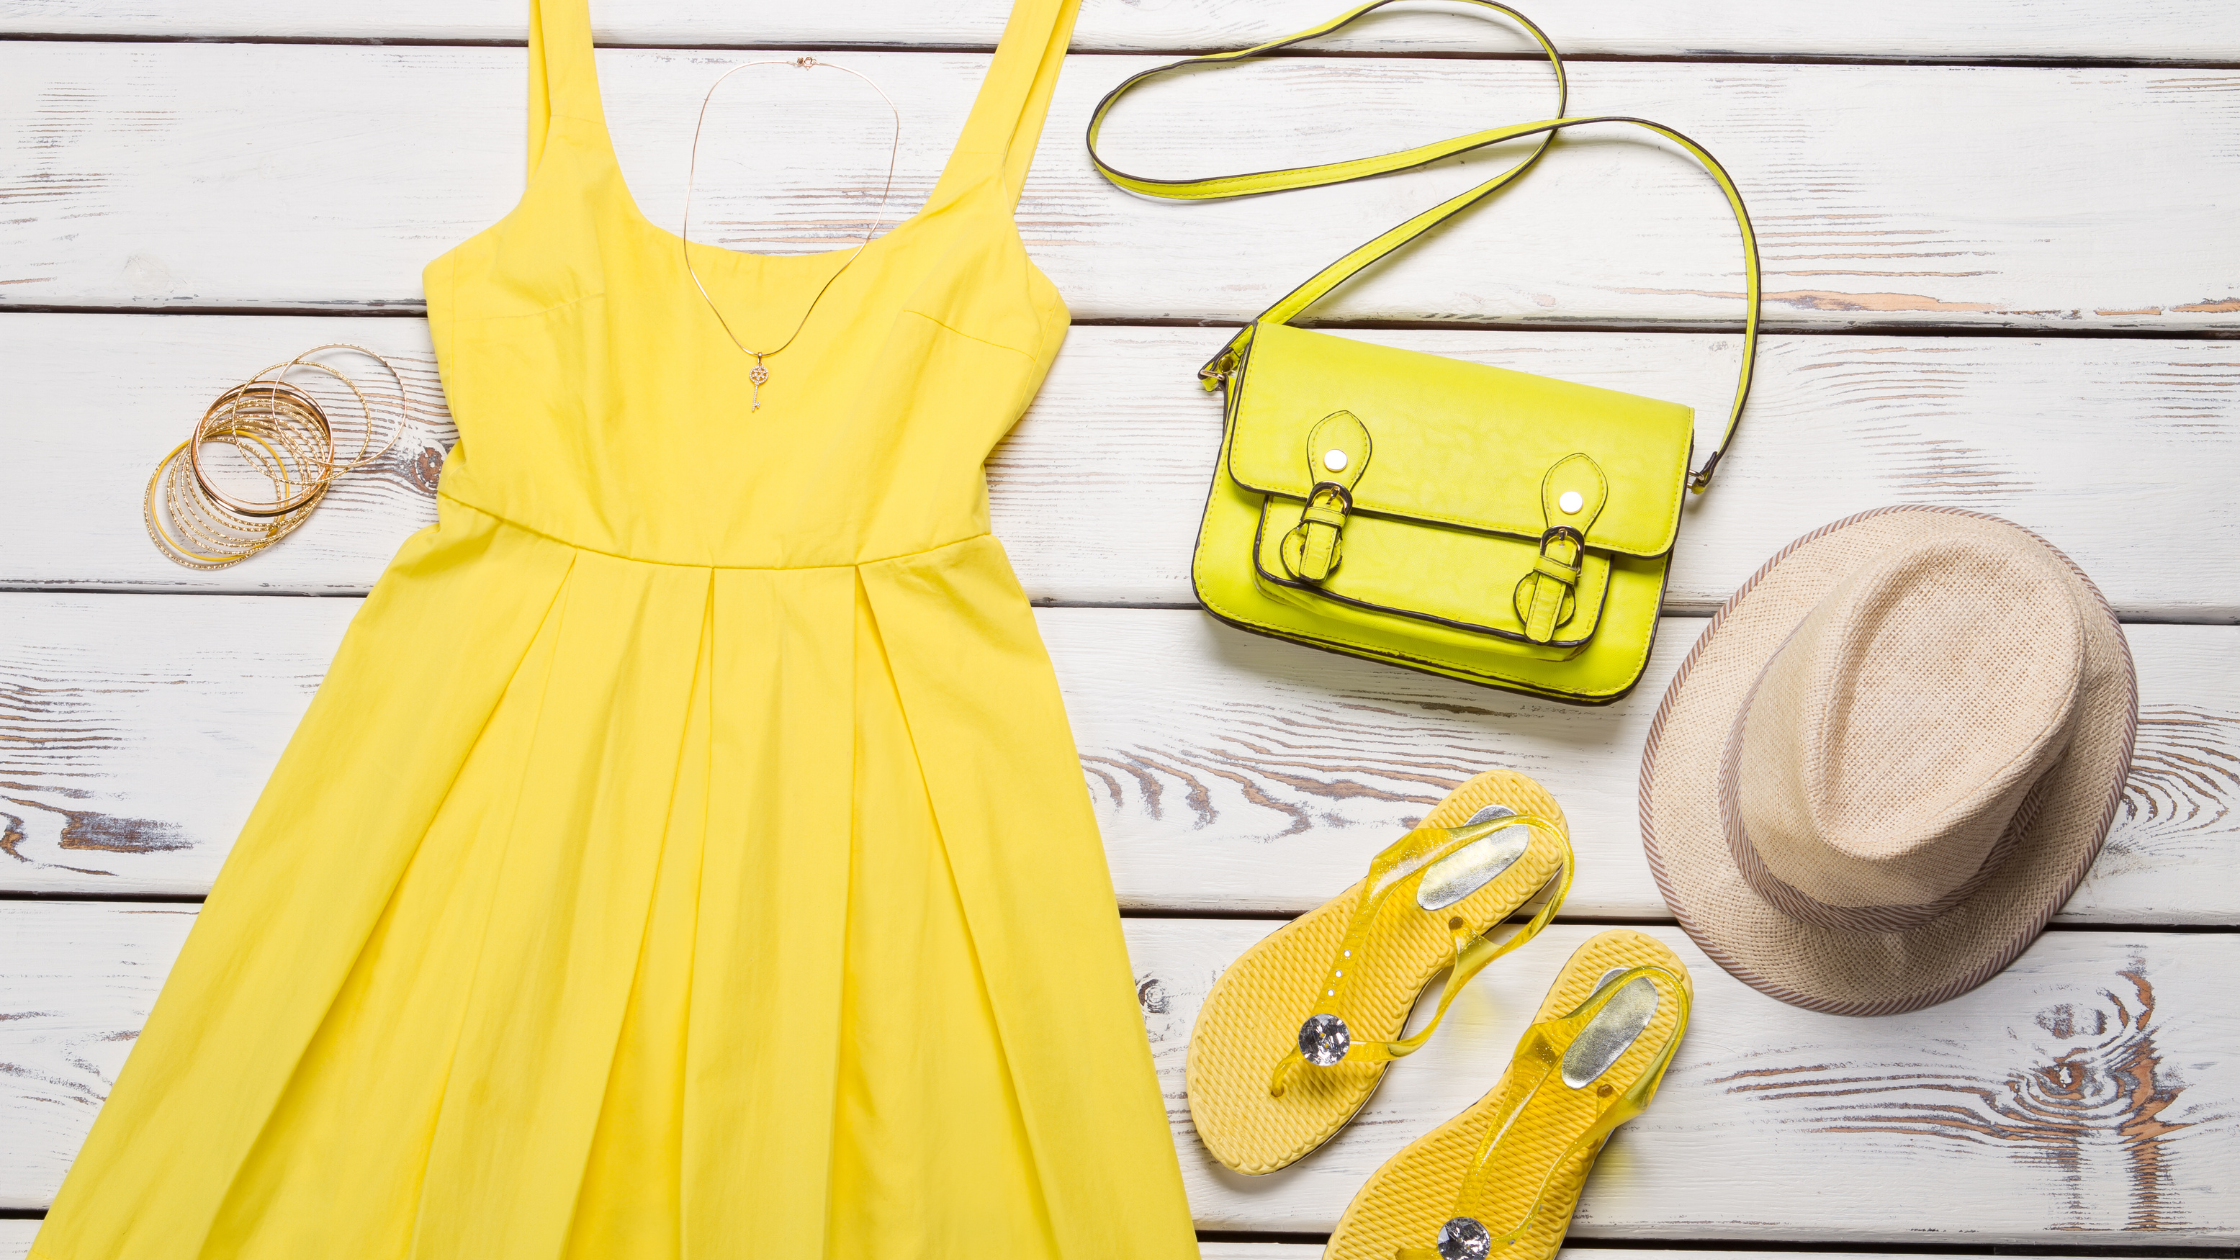 What To Wear With A Yellow Dress To A Wedding